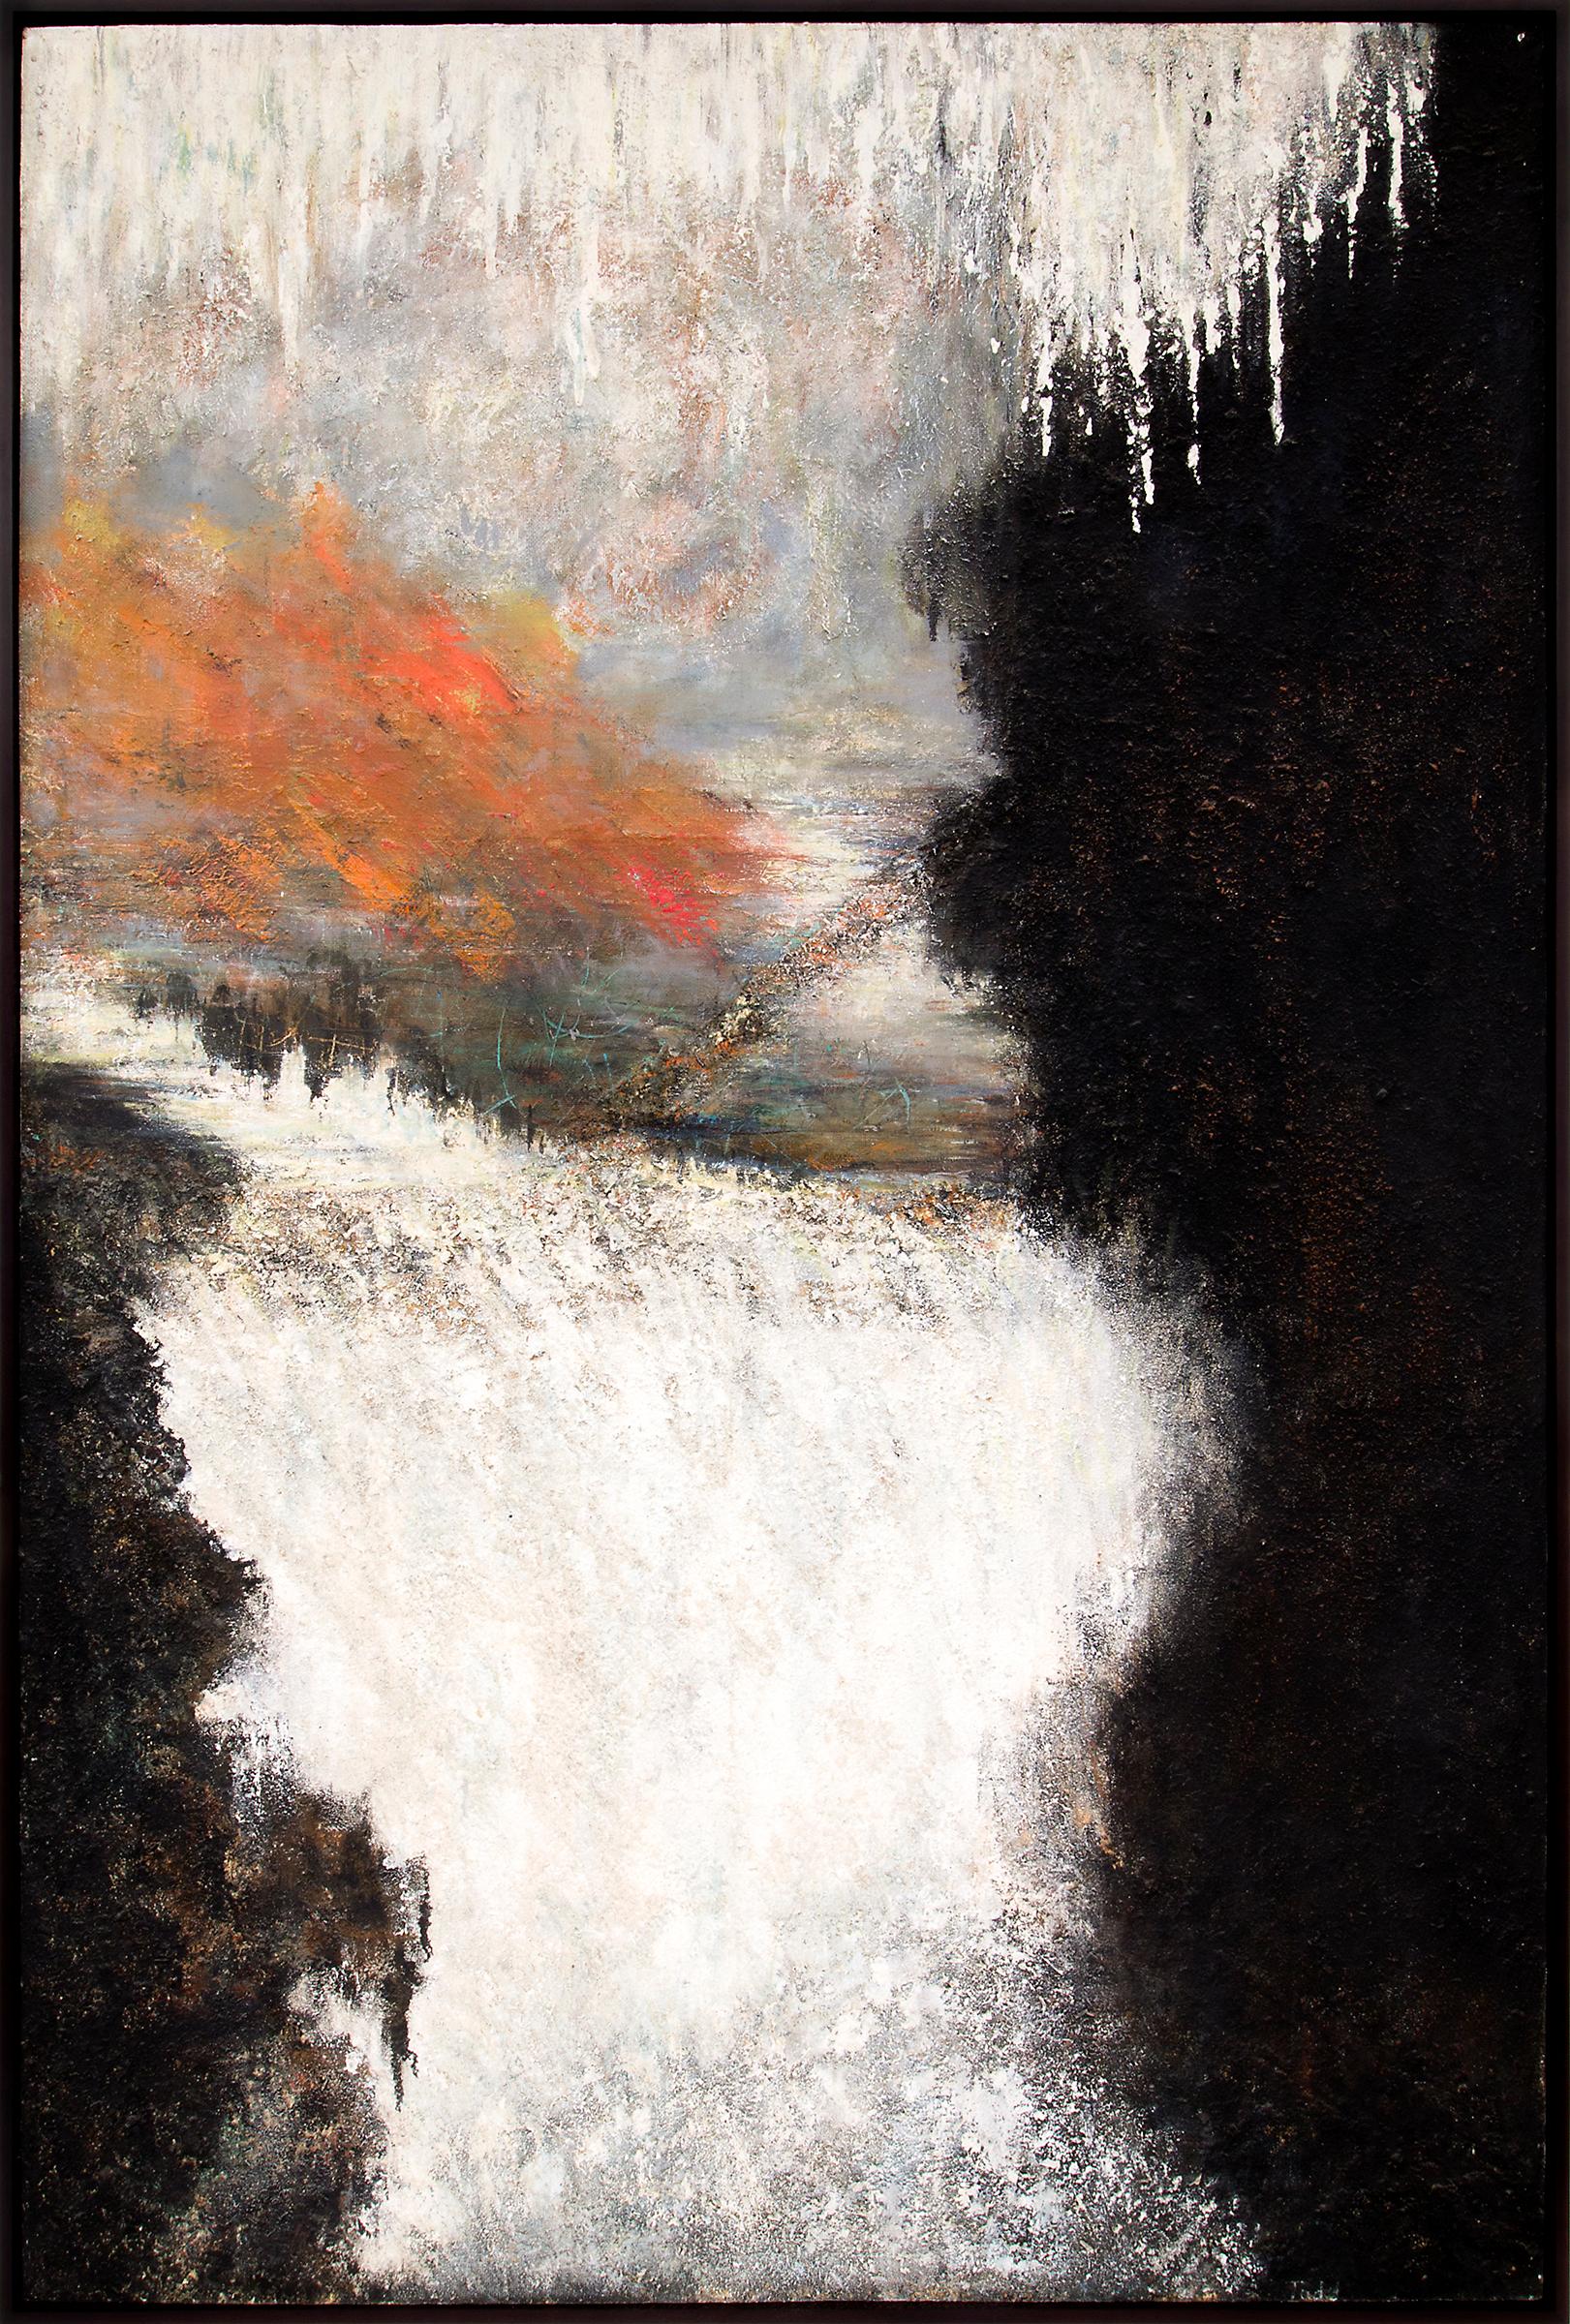 The Seventh Day (Large Abstract Painting in White, Black/Brown, Orange, Yellow) - Mixed Media Art by Ruth Todd